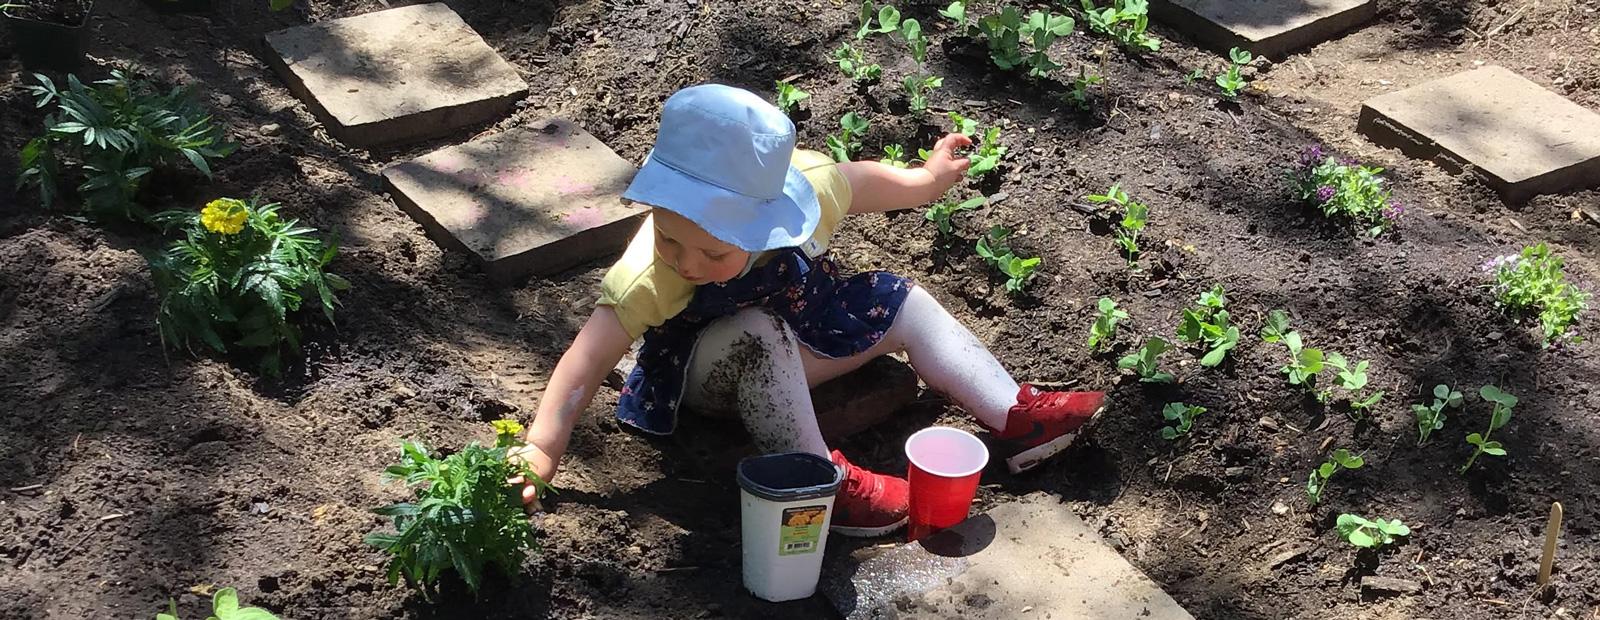 A toddler sitting in a garden planting flowers next to them.